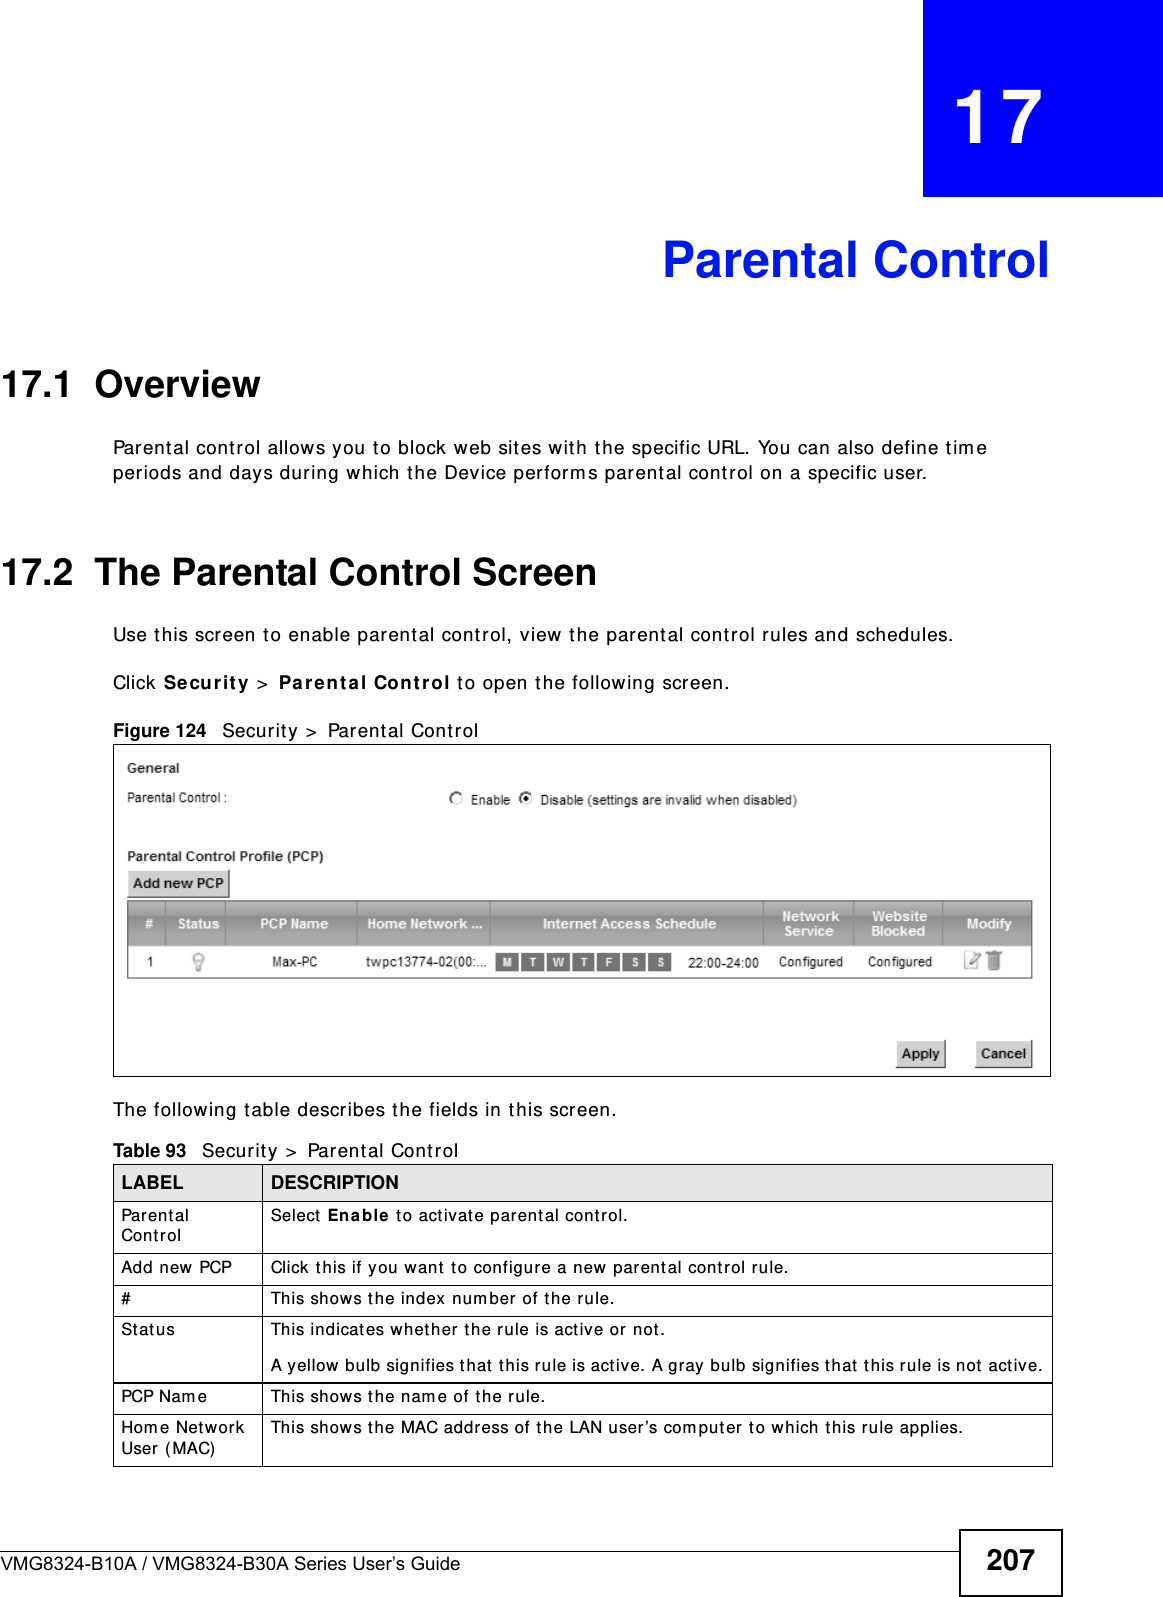 VMG8324-B10A / VMG8324-B30A Series User’s Guide 207CHAPTER   17Parental Control17.1  OverviewParent al control allow s you to block web sites with t he specific URL. You can also define time periods and days during which the Device perform s parent al control on a specific user. 17.2  The Parental Control ScreenUse t his screen t o enable parent al cont rol, view t he parental cont rol rules and schedules.Click Se cu r it y  &gt;  Pa re nt al Contr ol t o open t he following screen. Figure 124   Securit y  &gt;  Parental Cont rol The following t able describes the fields in this screen. Table 93   Secur ity &gt;  Parental ControlLABEL DESCRIPTIONParent al ControlSelect Enable t o activat e parental control.Add new PCP Click t his if you want  t o configure a new parent al control rule.#This shows the index num ber of t he rule.St atus This indicates w het her the rule is act ive or not.A yellow bulb signifies that  this rule is act ive. A gray bulb signifies t hat t his rule is not active.PCP Nam e This shows the nam e of the rule.Hom e Net work User ( MAC)This show s t he MAC address of the LAN user’s com put er t o which t his rule applies.